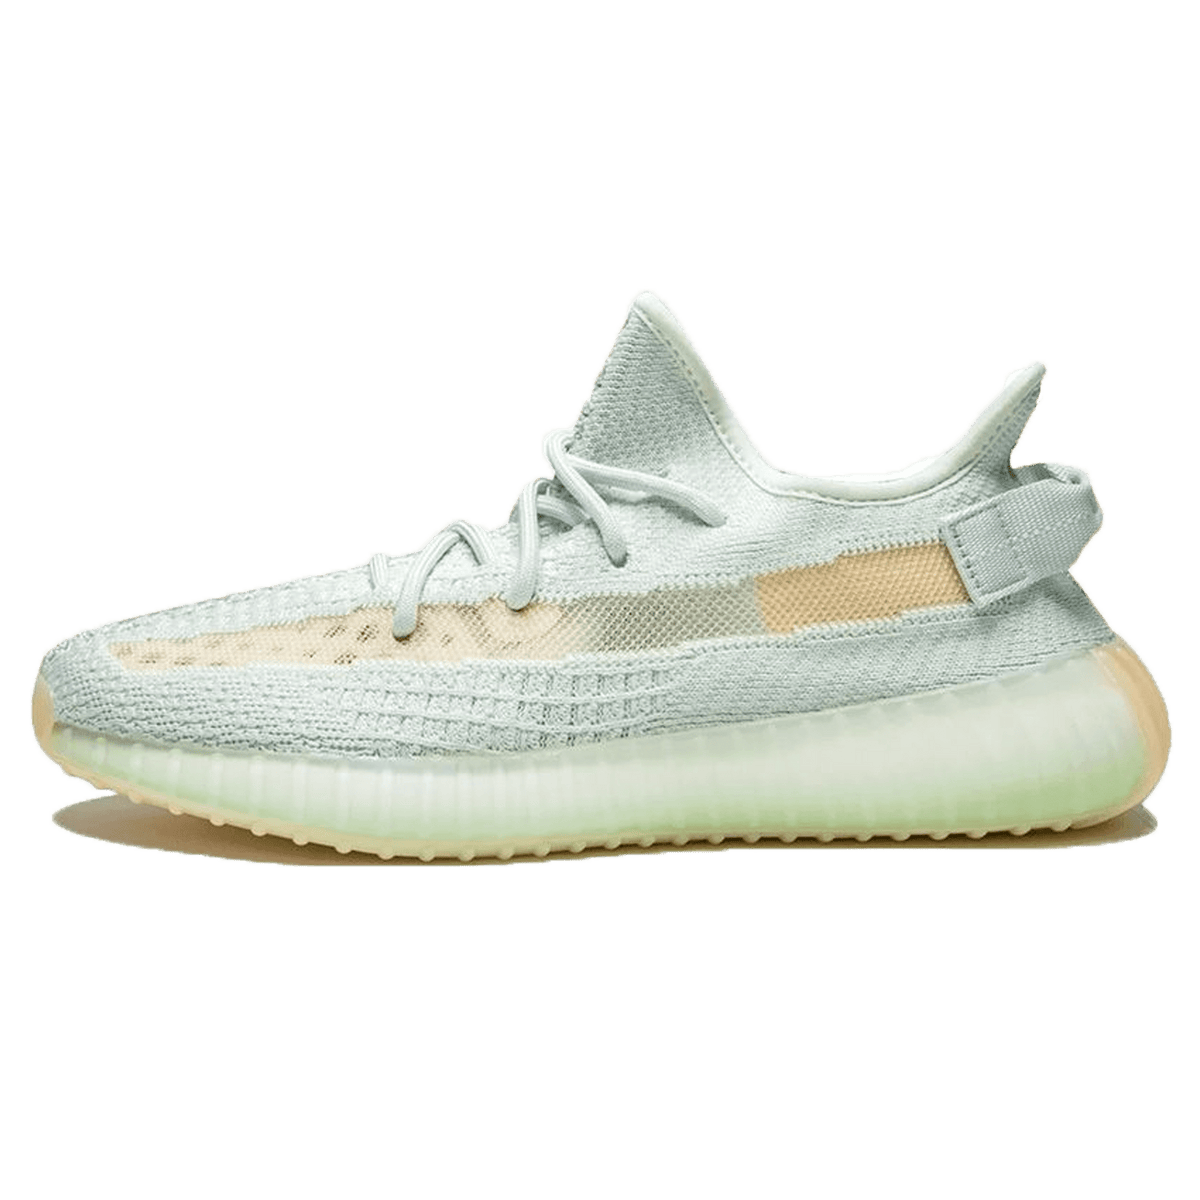 adidas bags Yeezy Boost 350 V2 Hyperspace